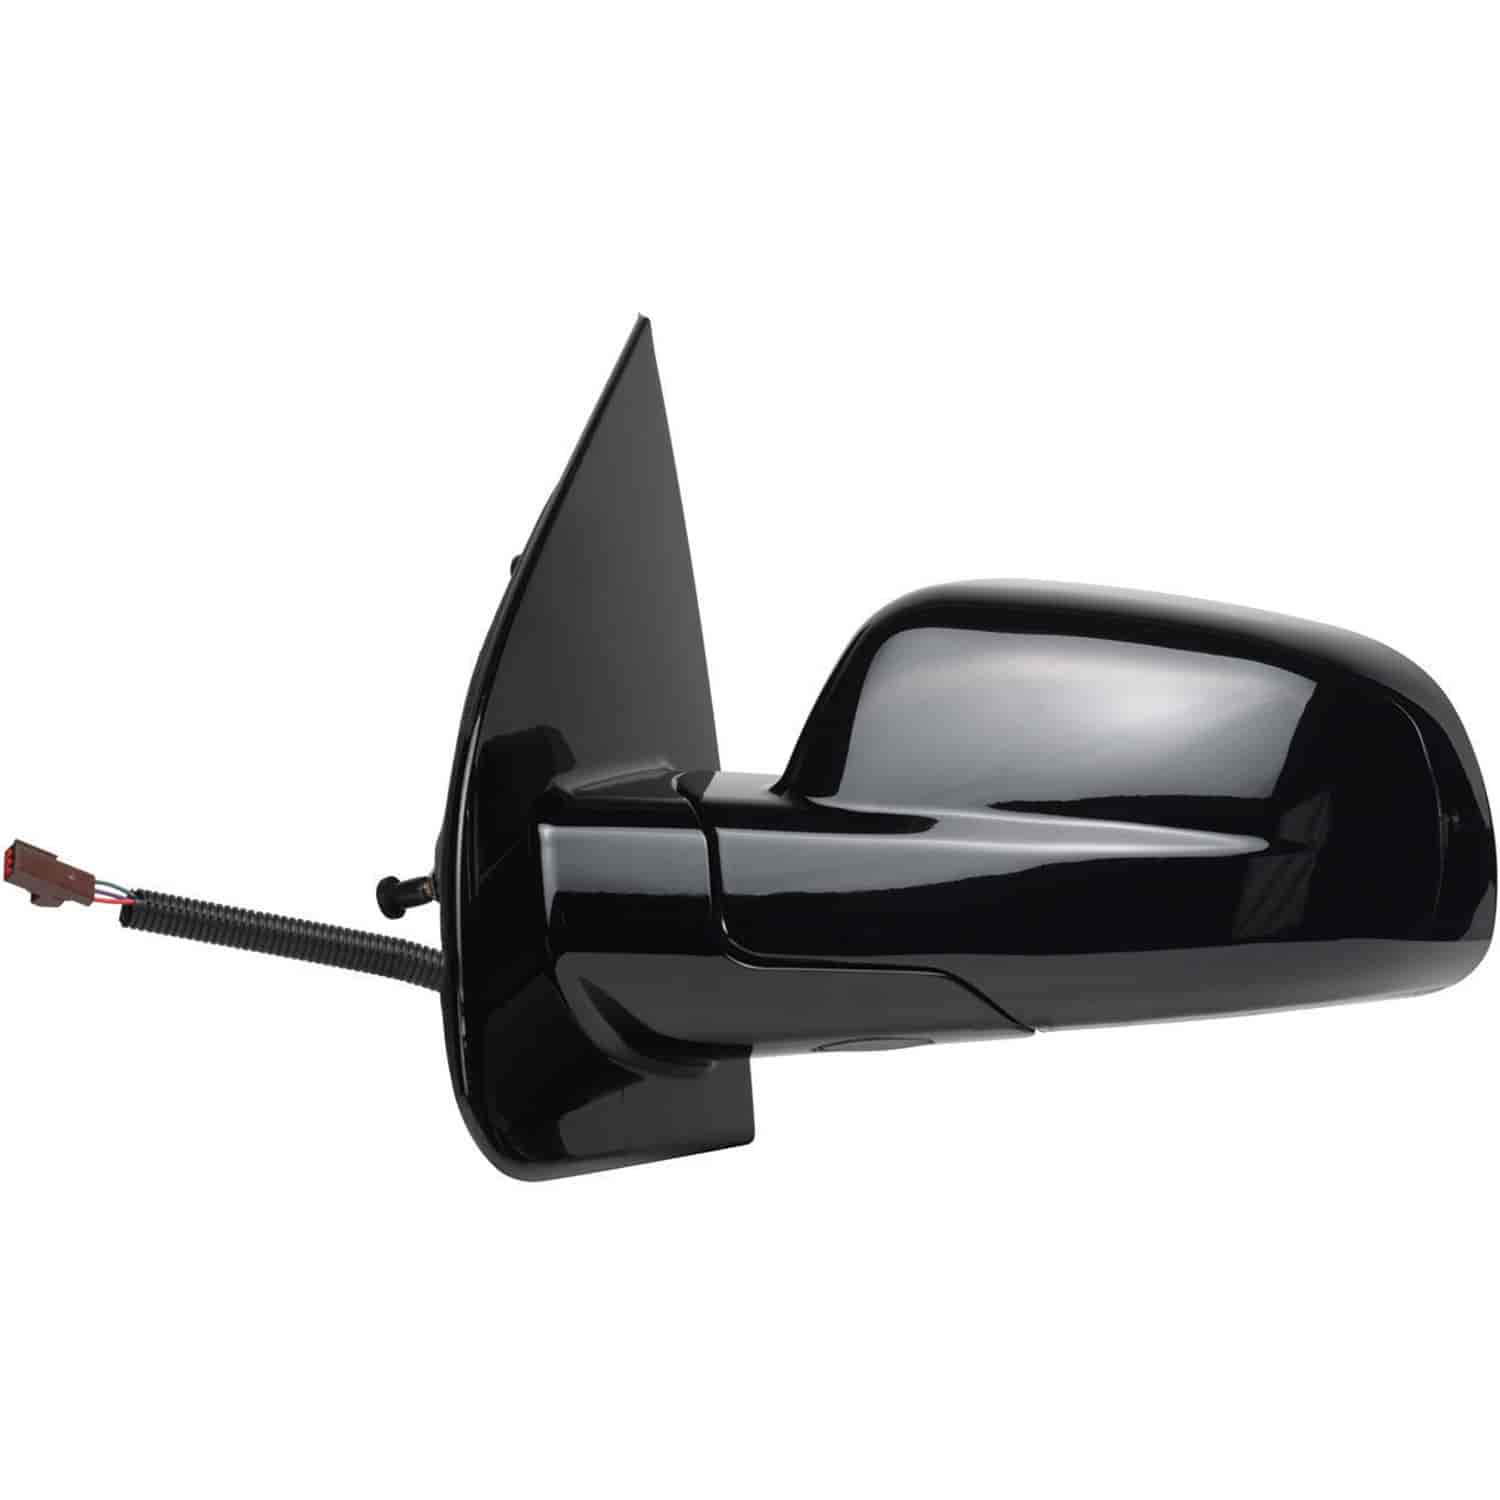 OEM Style Replacement mirror for 04-05 Ford Freestar